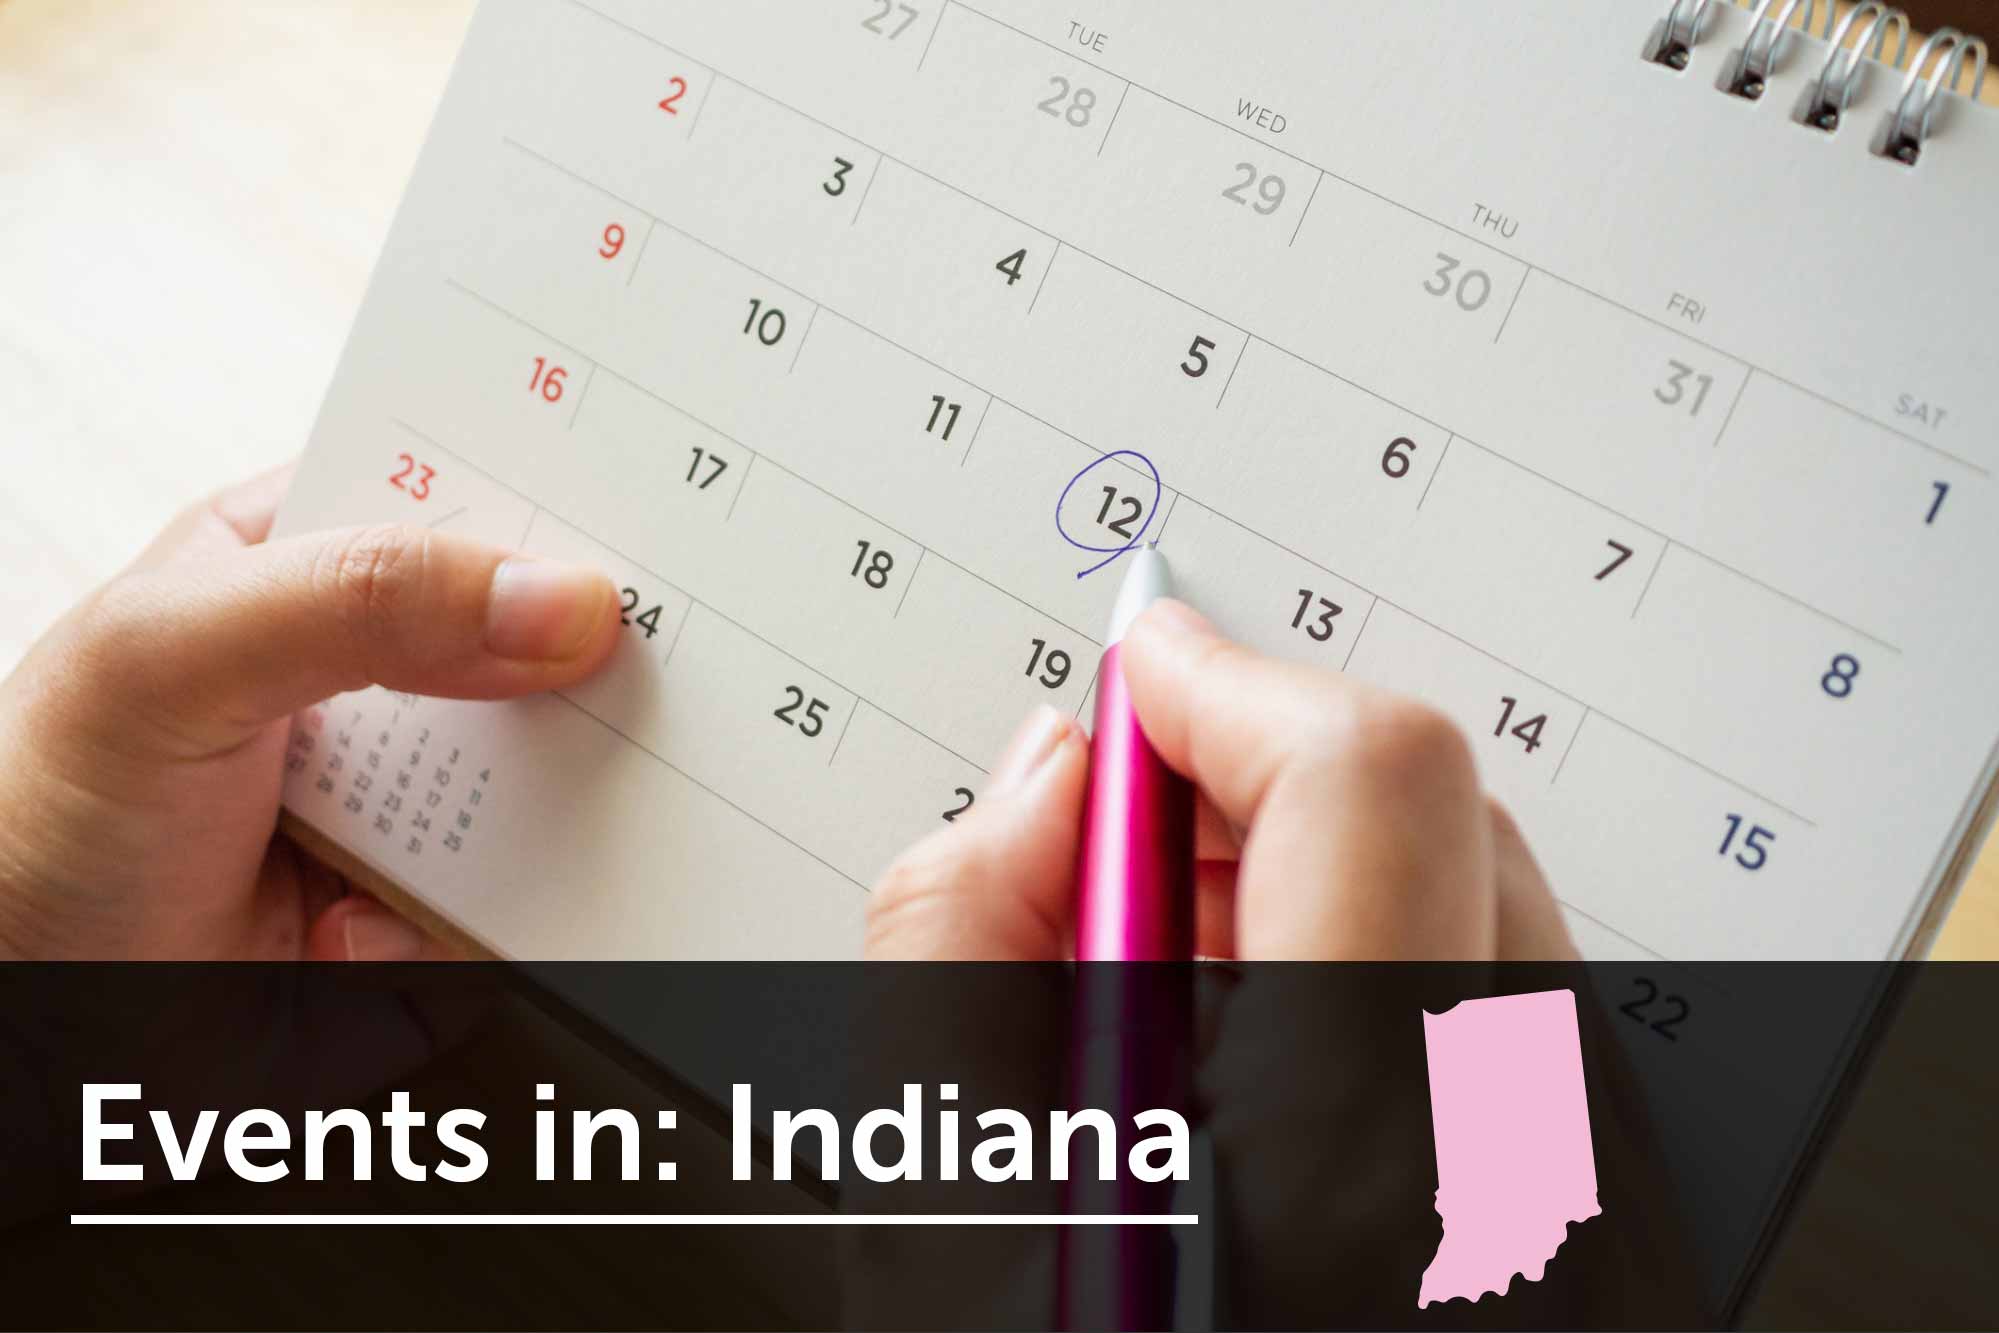 Women's business events in Indiana